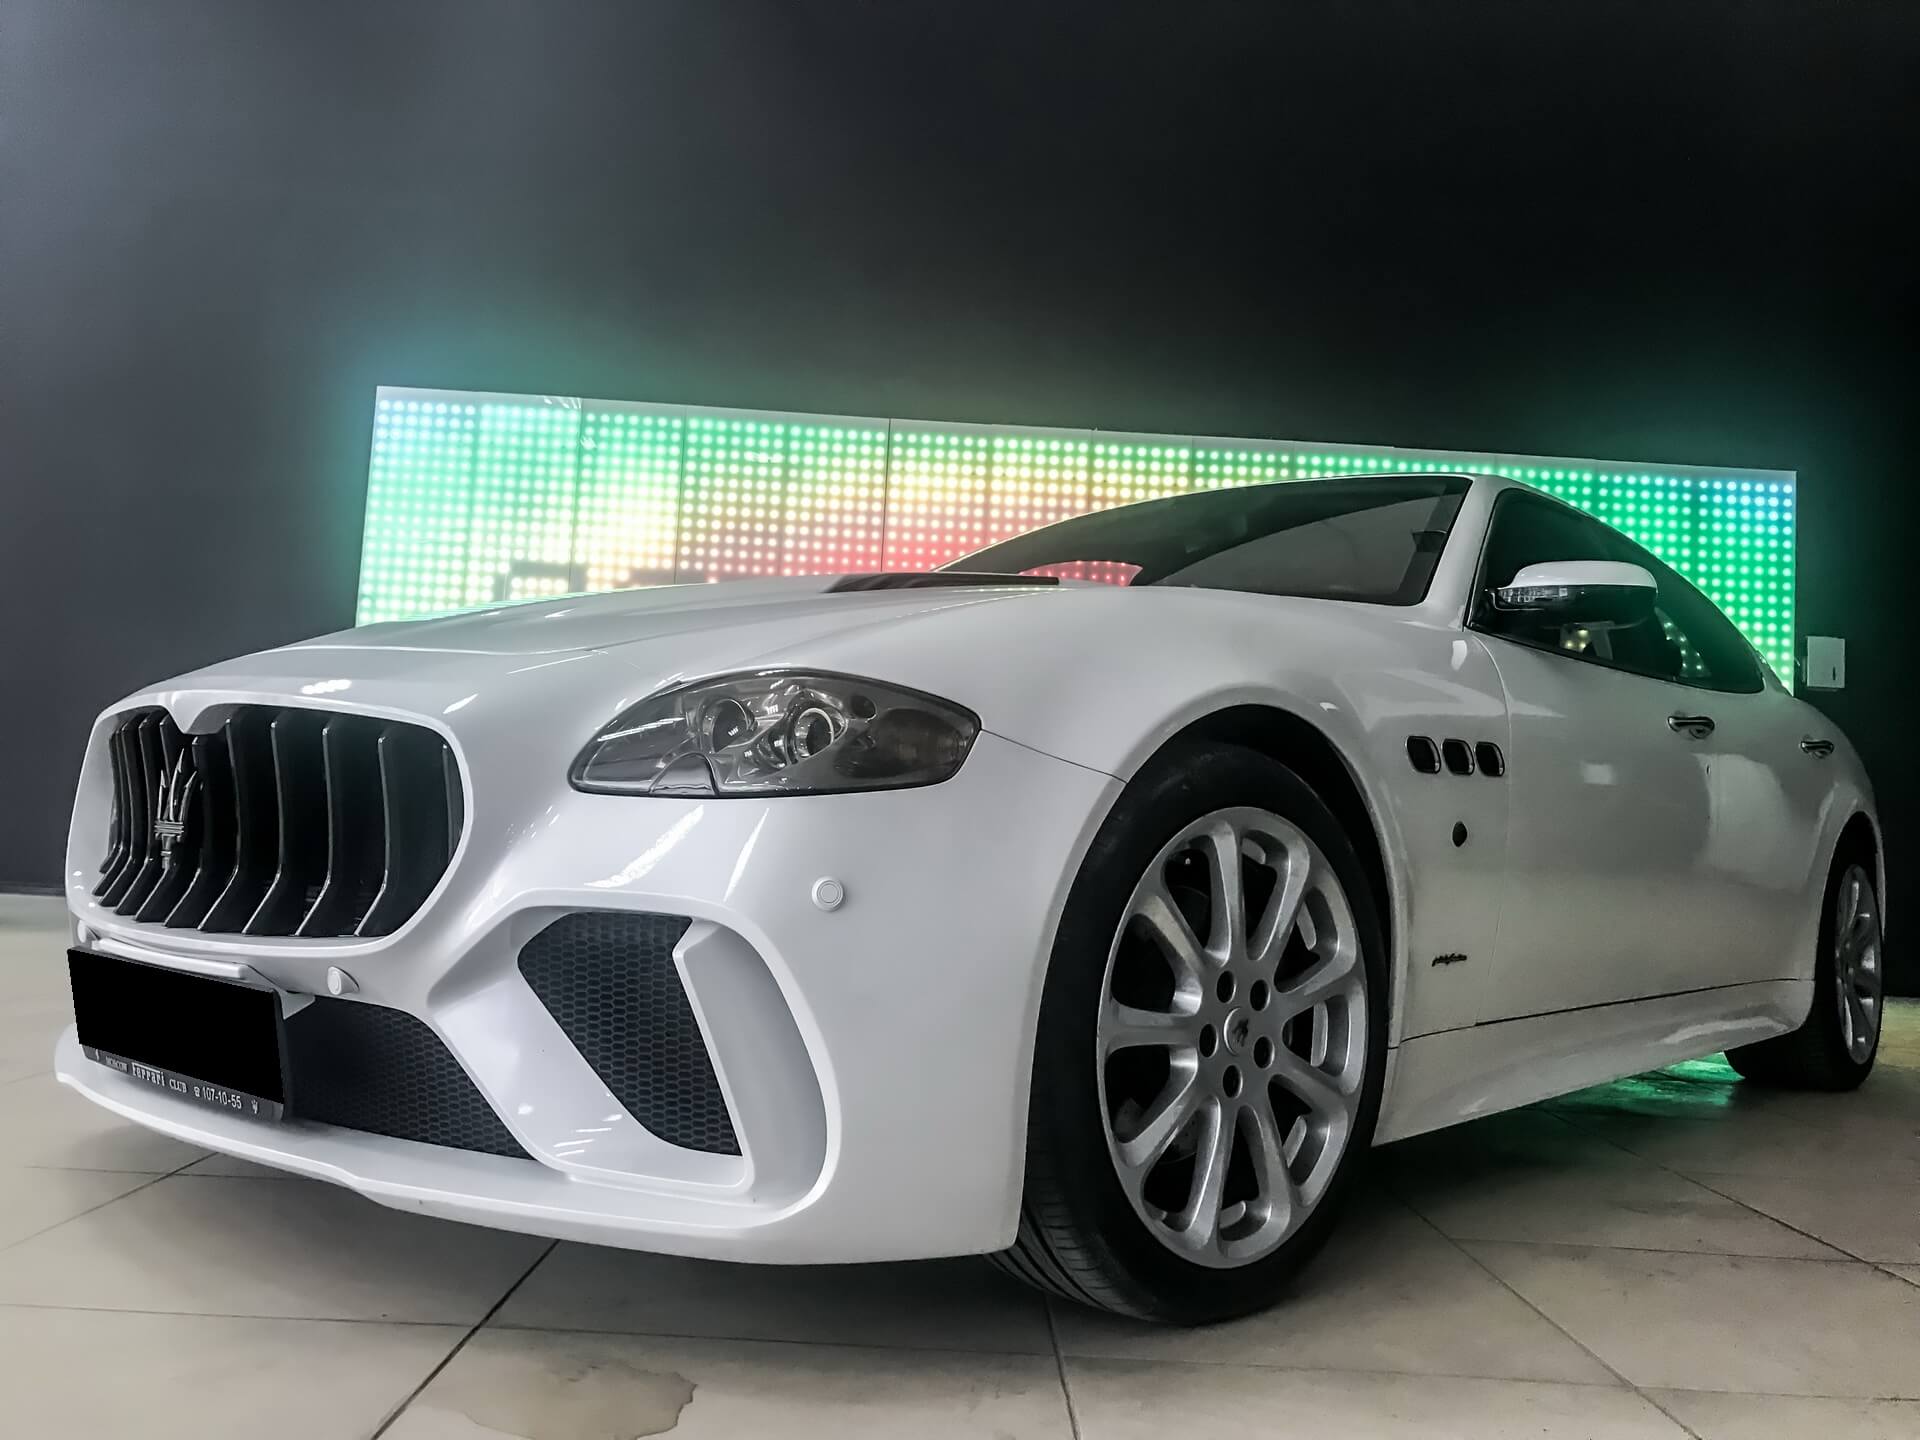 Check price and buy SCL Performance Global body kit for Maserati Quattroporte